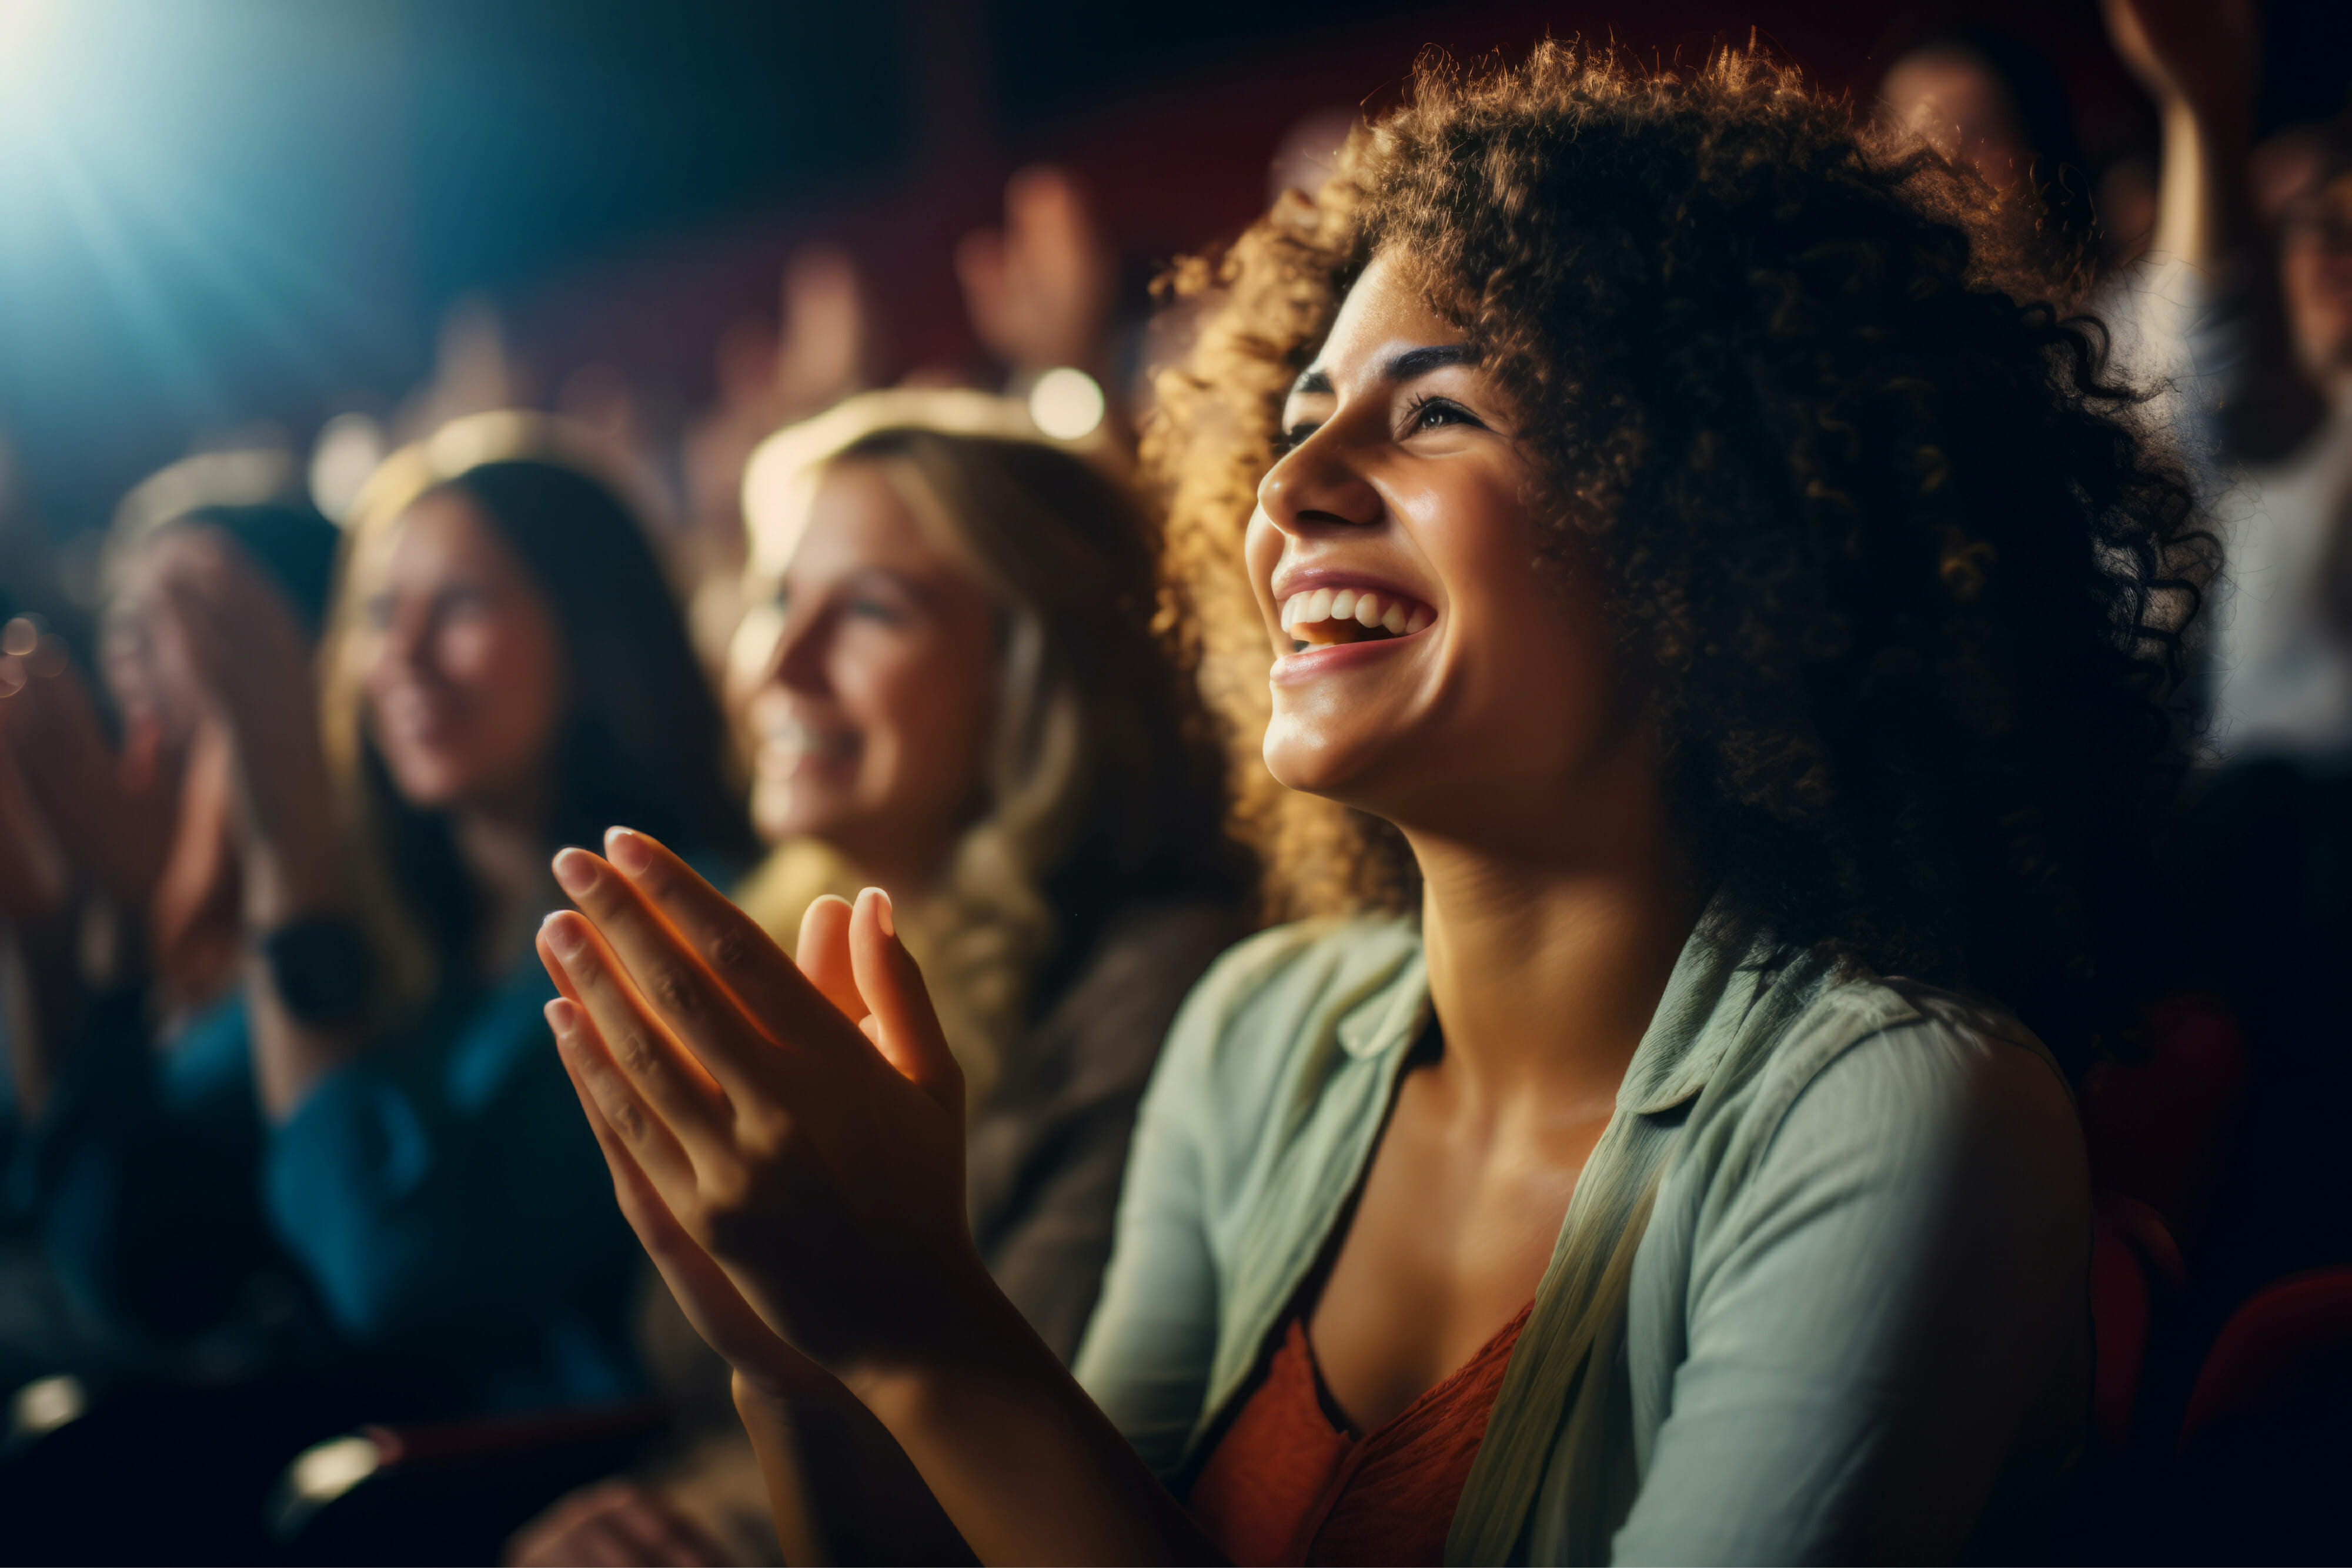 Women in the audience at the theater clapping, cheering and having fun together